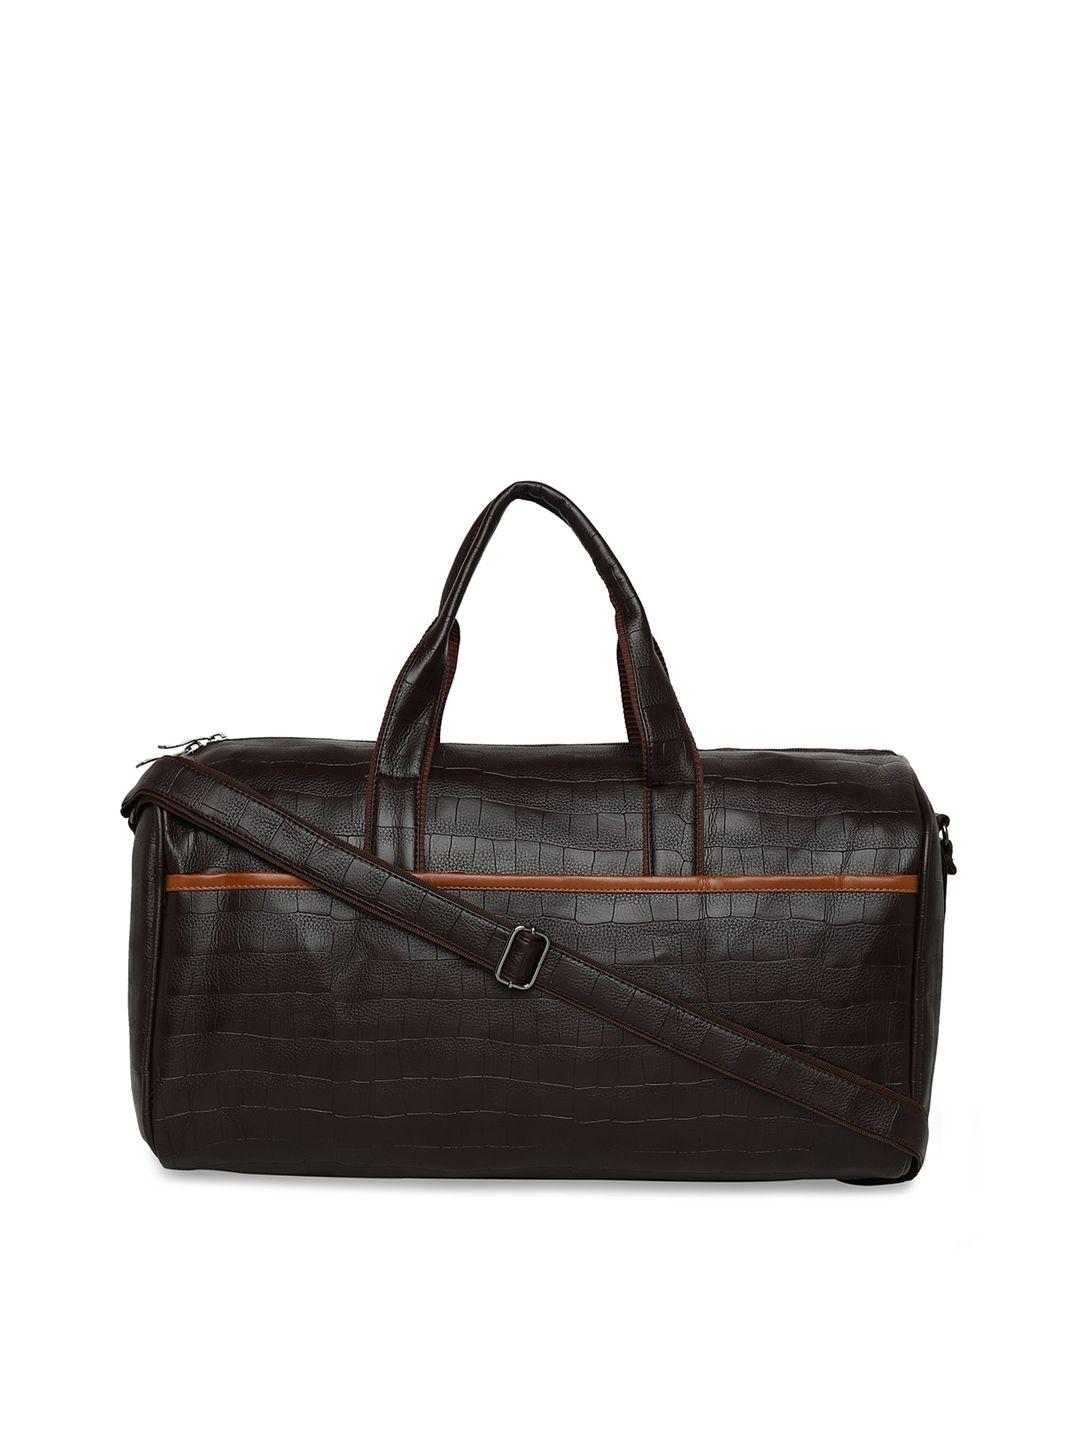 mboss brown croc textured faux leather travel duffel bag